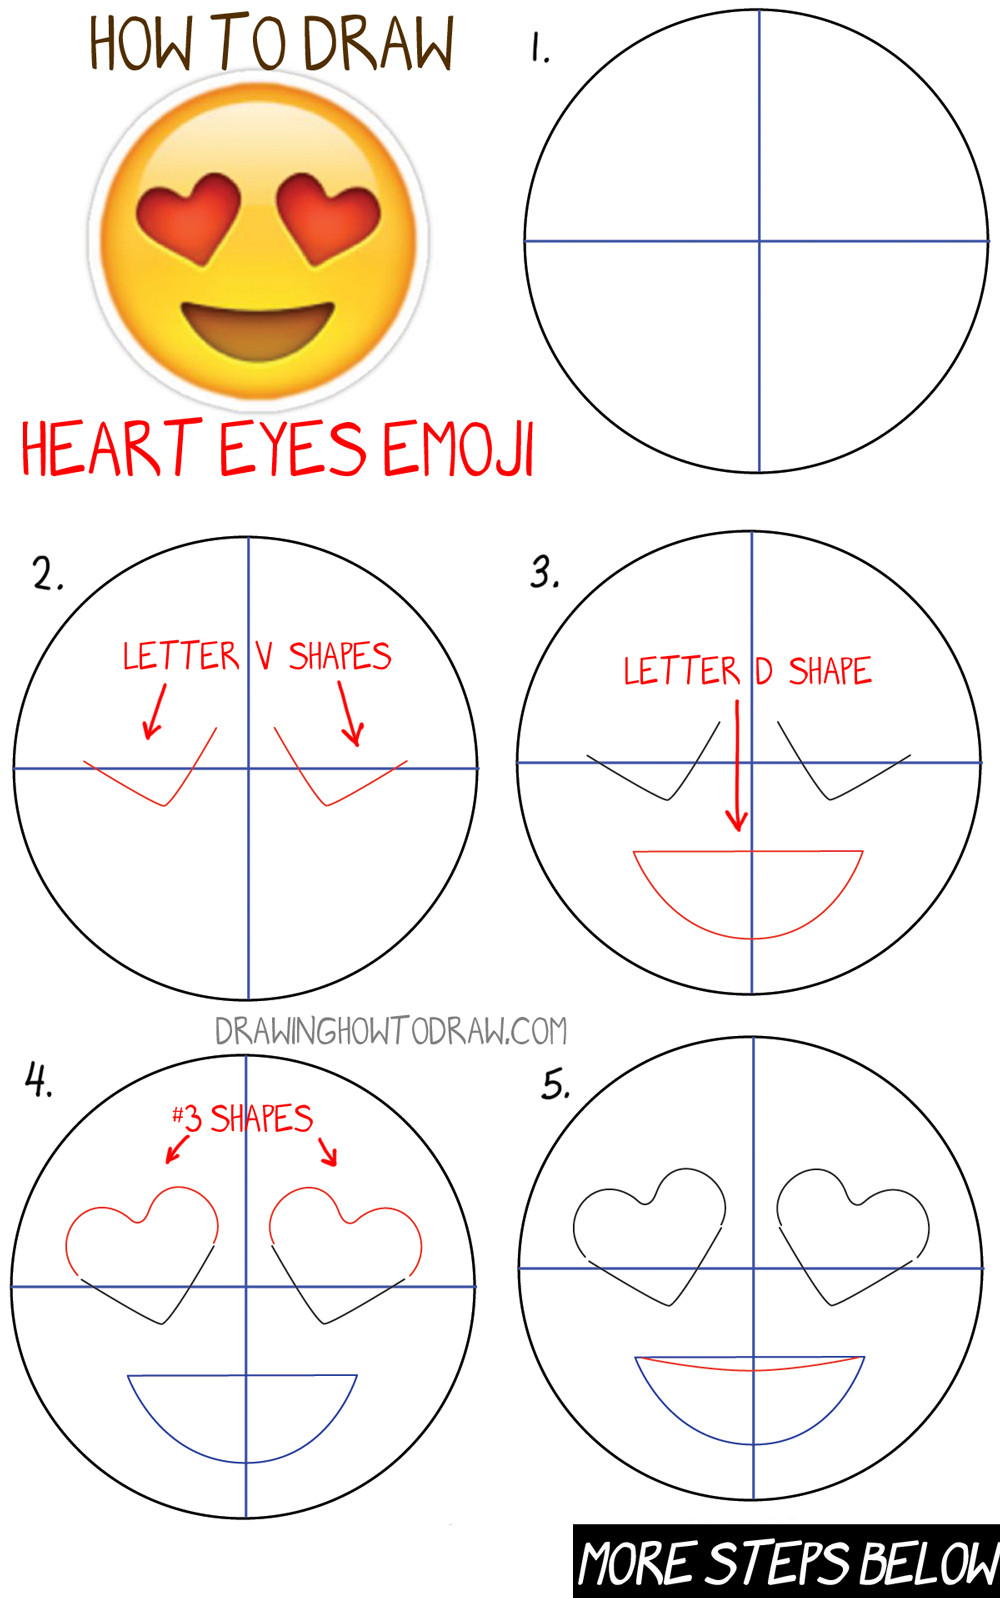 How to Draw Heart Eyes Emoji Face - Easy Steps Lesson